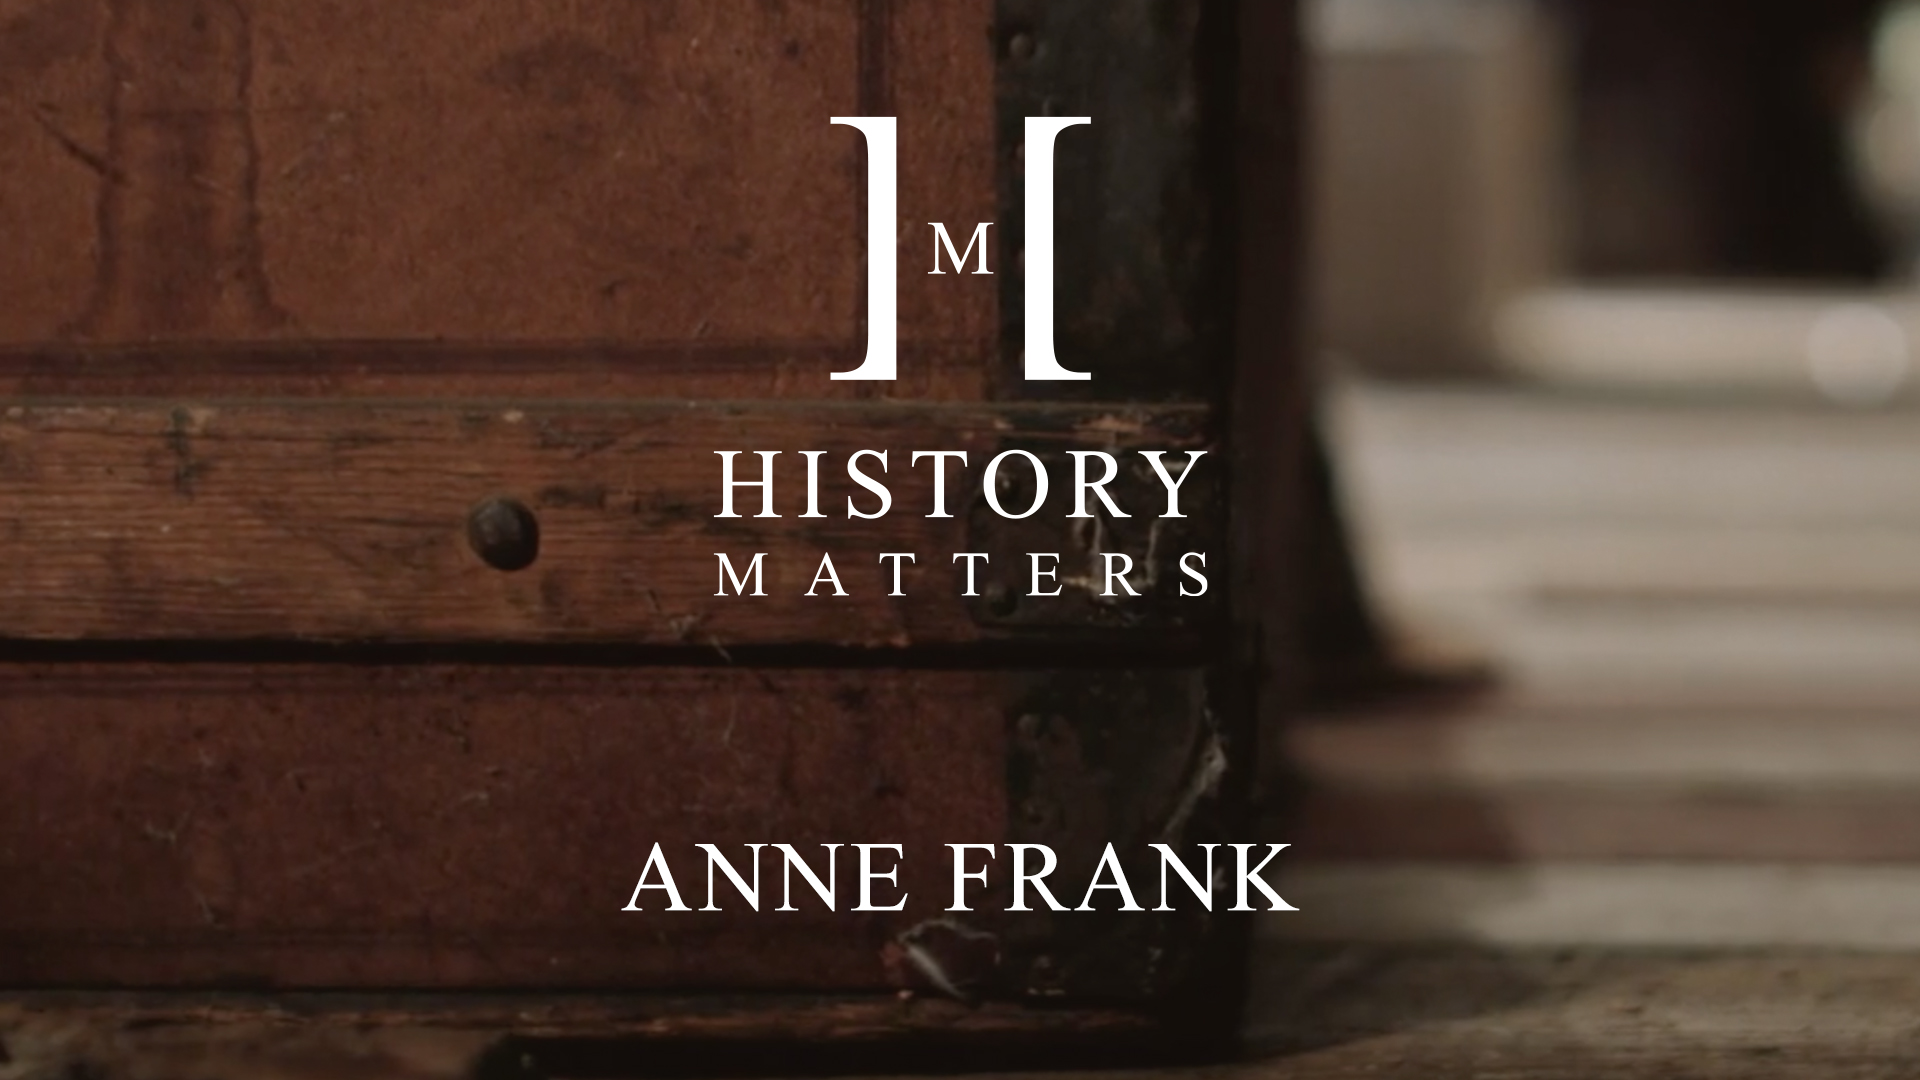 History Matters Anne Frank by Beth Bryant